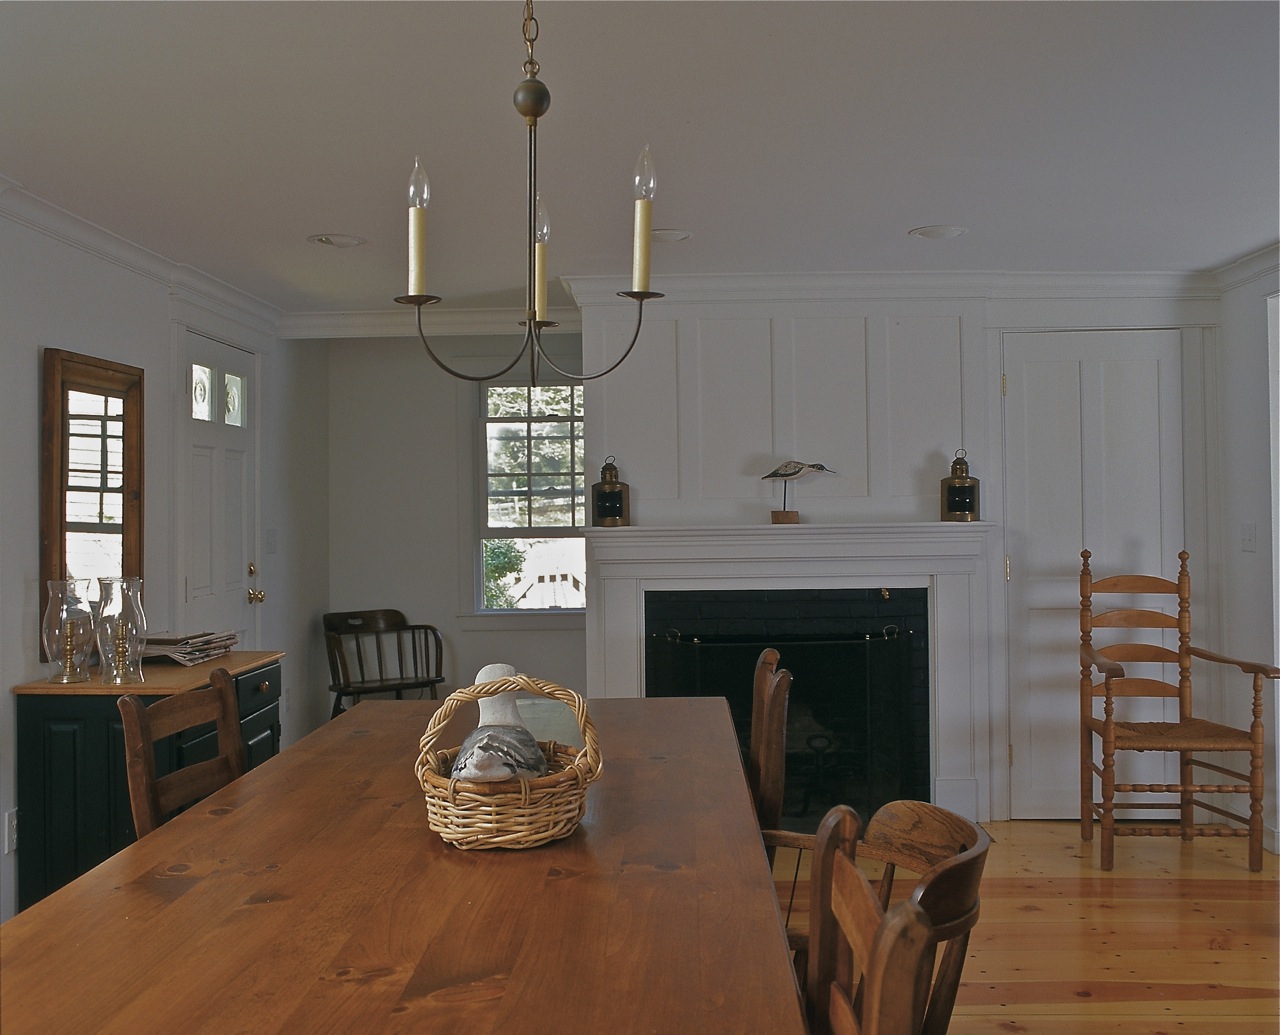 Paneled fireplace and mantel at dining room, open plan interior, traditional Cape Cod house, Chatham MA